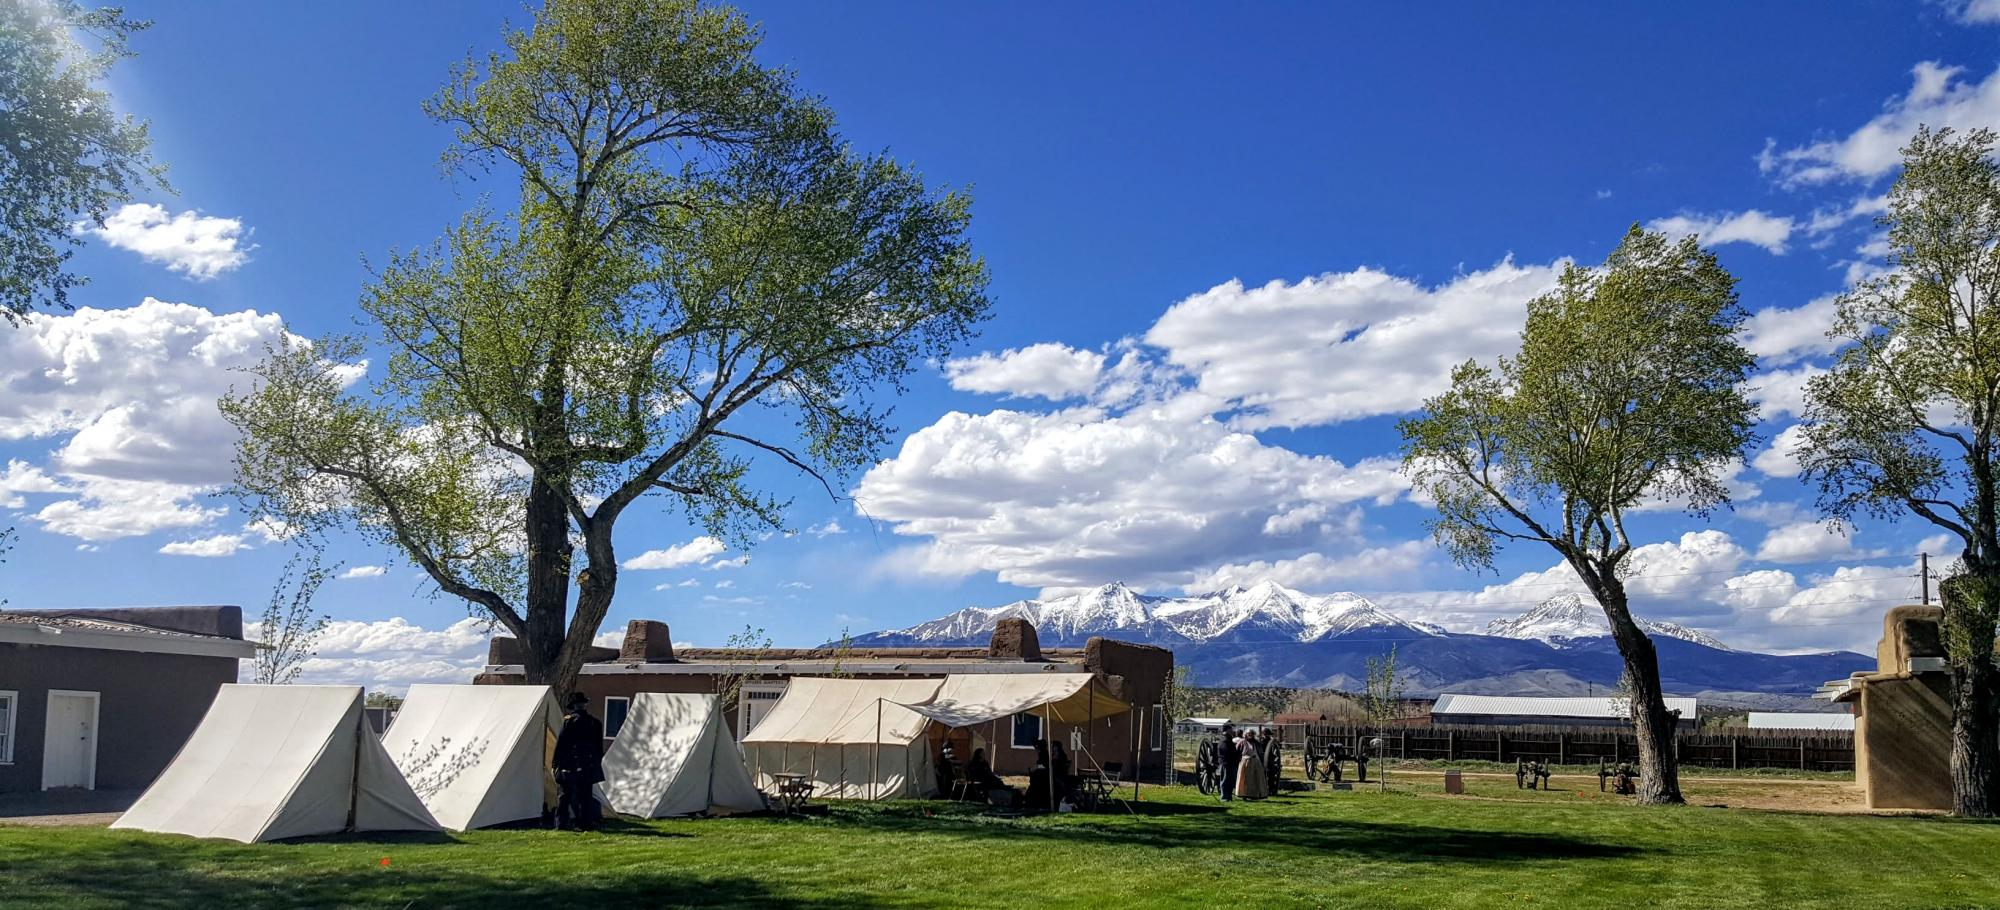 Photo of the Fort Garland museum on a sunny day, white fluffy clouds float across the brilliant blue sky. The grass is green between the low museum buildings, and a few tents have been erected on the grounds. Four cannons are toward the back of the grounds, and it appears to be a re-enactment day at the museum. Snow-capped mountains rise in the distance, touching the sky.